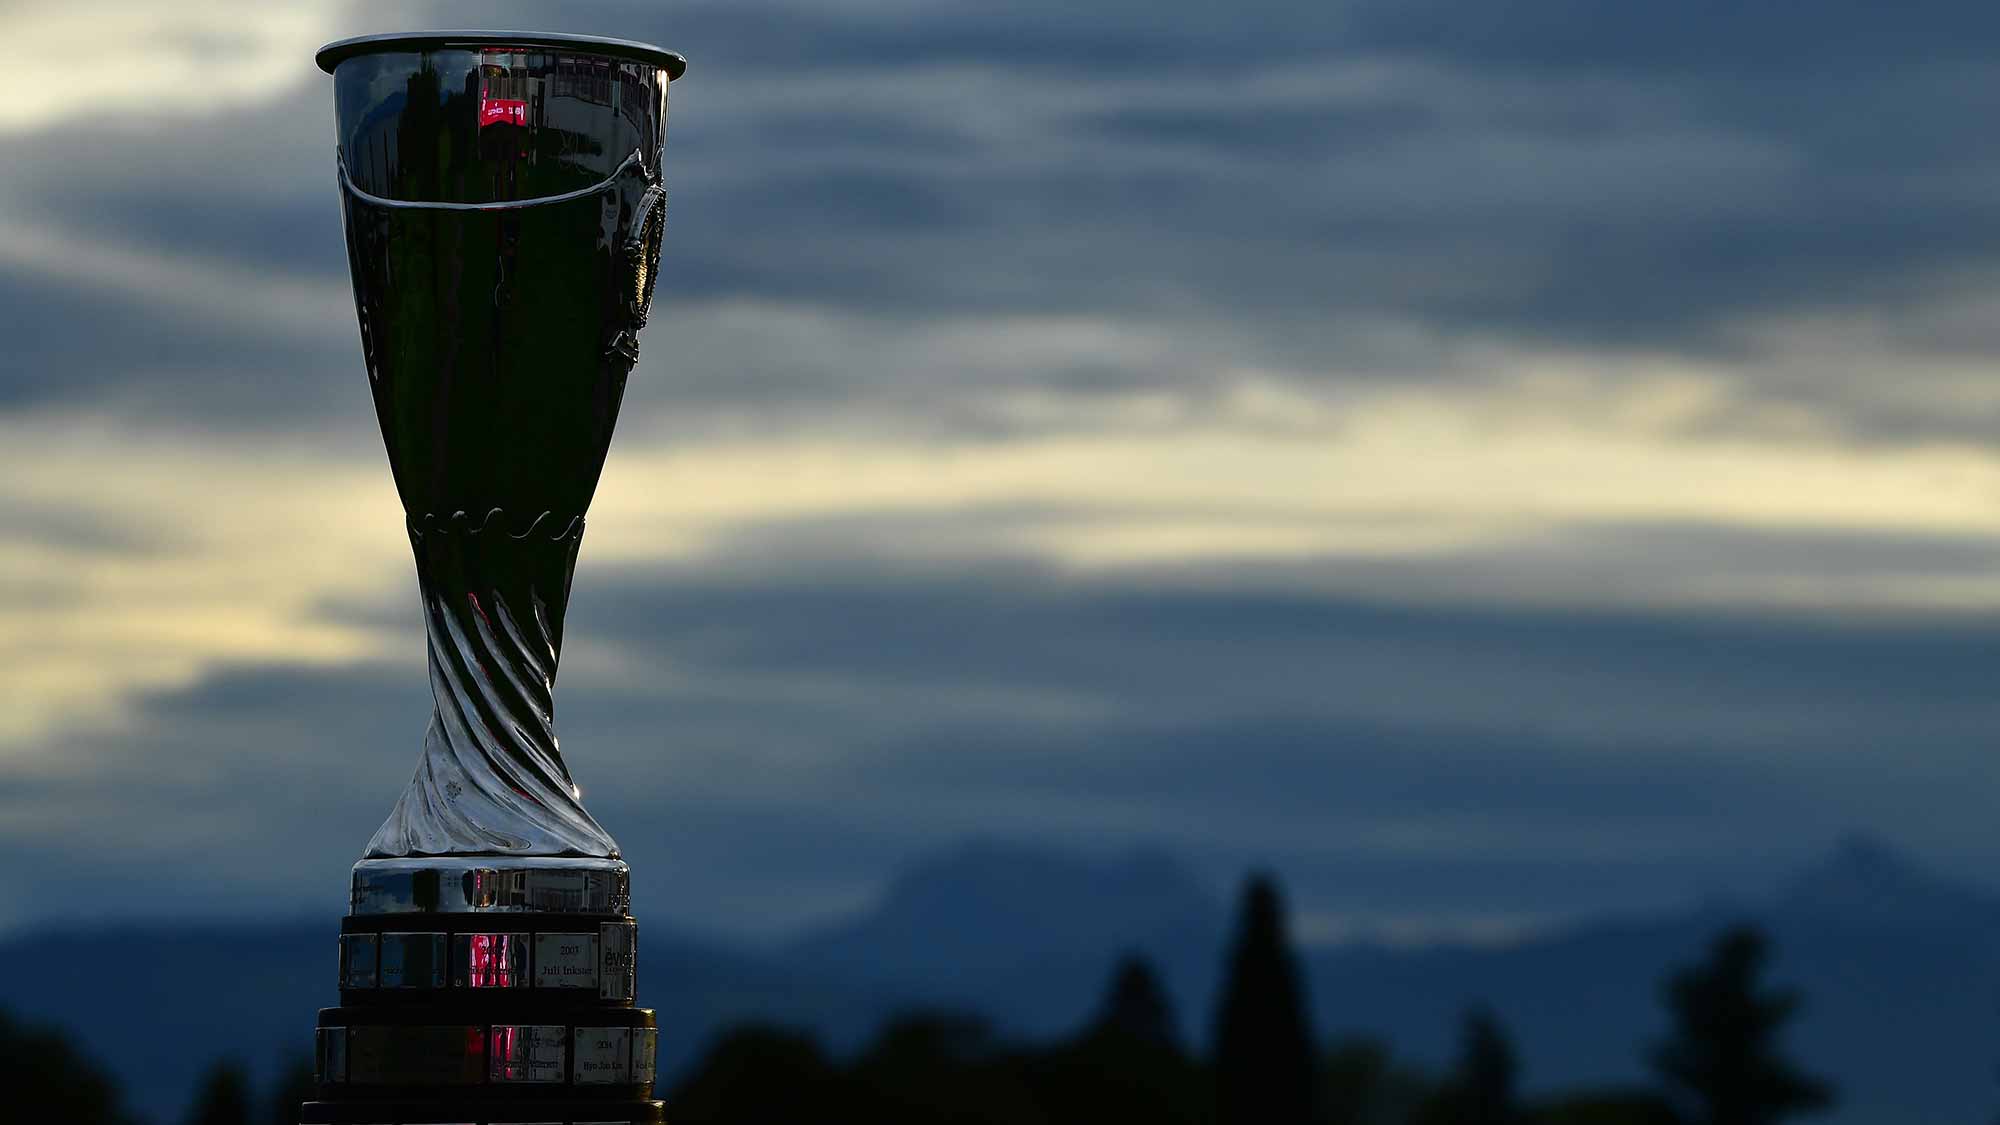 The winners trophy is seen during the pro - am prior to the start of The Evian Championship at Evian Resort Golf Club 